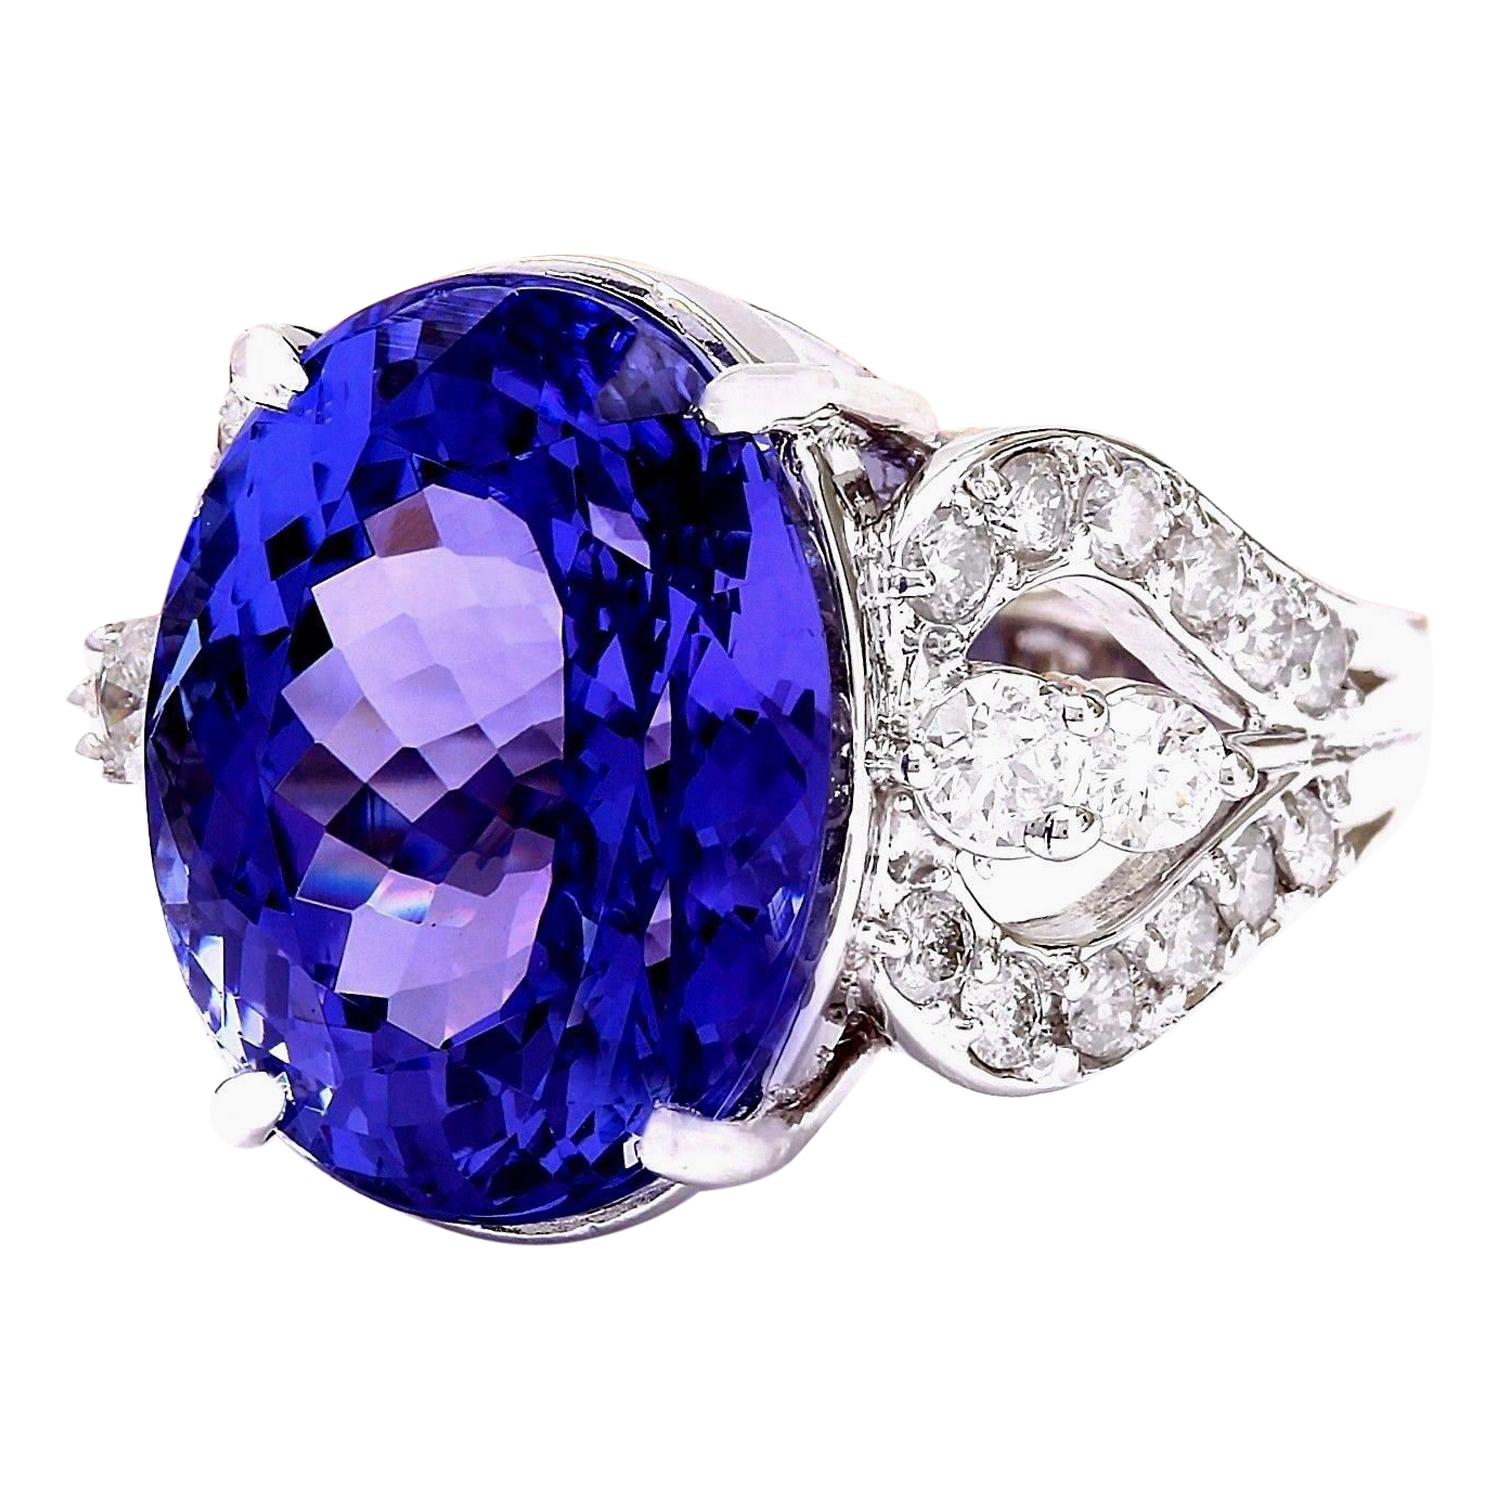 12.62 Carat  Tanzanite 14K Solid White Gold Diamond Ring
Item Type: Ring
Item Style: Cocktail
Material: 14K White Gold
Mainstone: Tanzanite
Stone Color: Blue
Stone Weight: 11.47 Carat
Stone Shape: Oval
Stone Quantity: 1
Stone Dimensions: 16.00x12.00